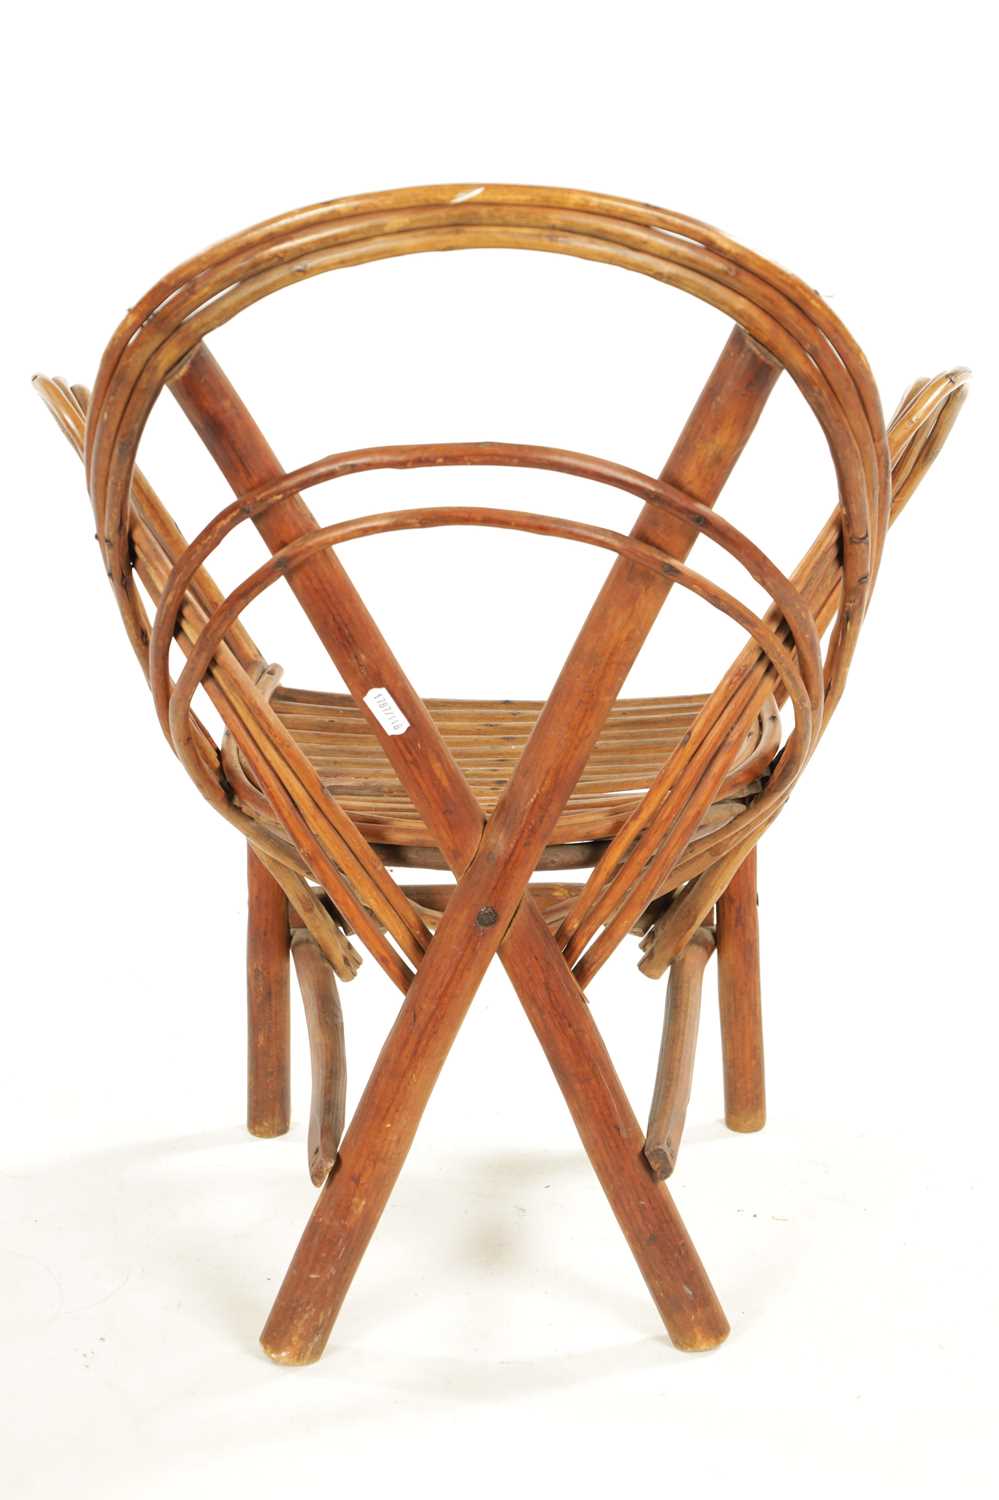 A 19TH CENTURY CANED BENT WOOD CHILD’S CHAIR - Image 4 of 5